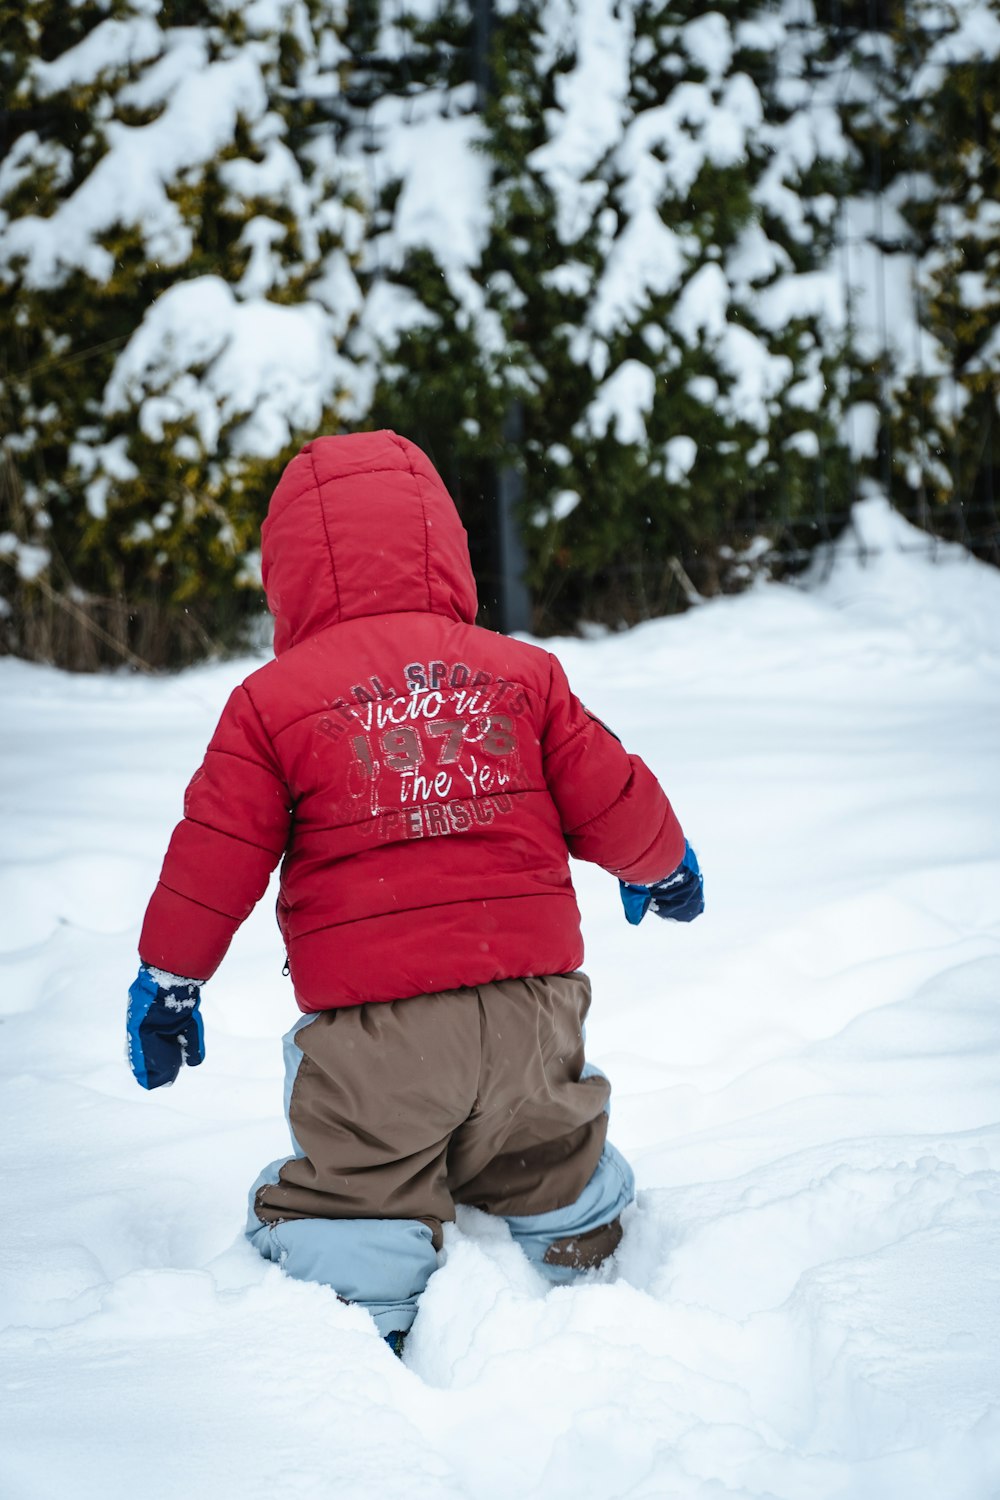 a small child in a red jacket playing in the snow